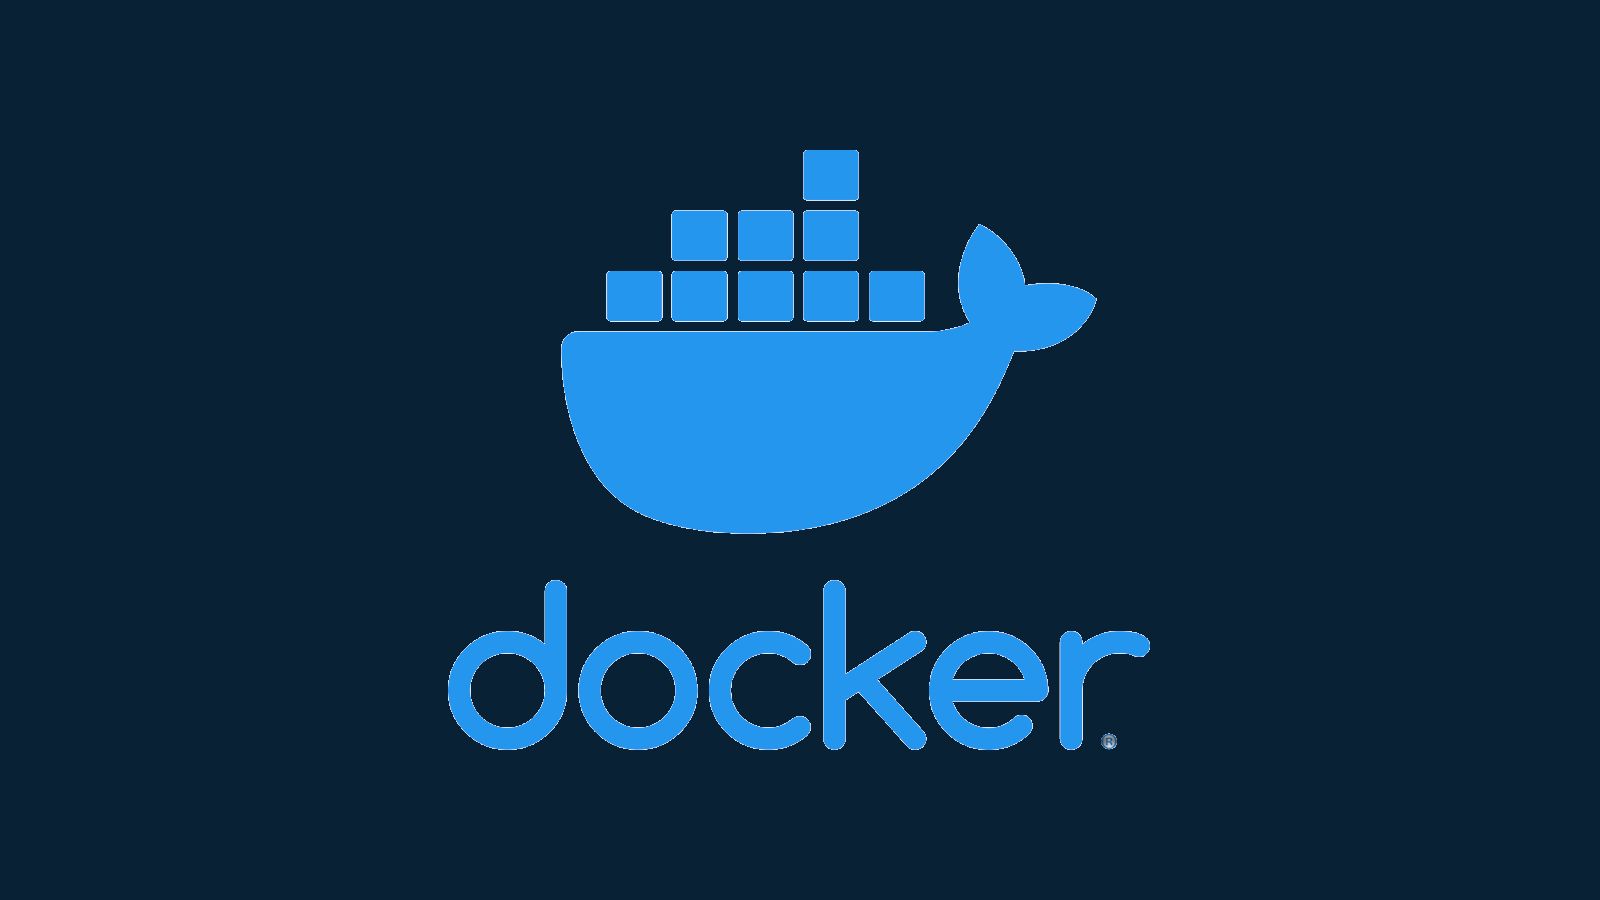 Graphic showing the Docker logo